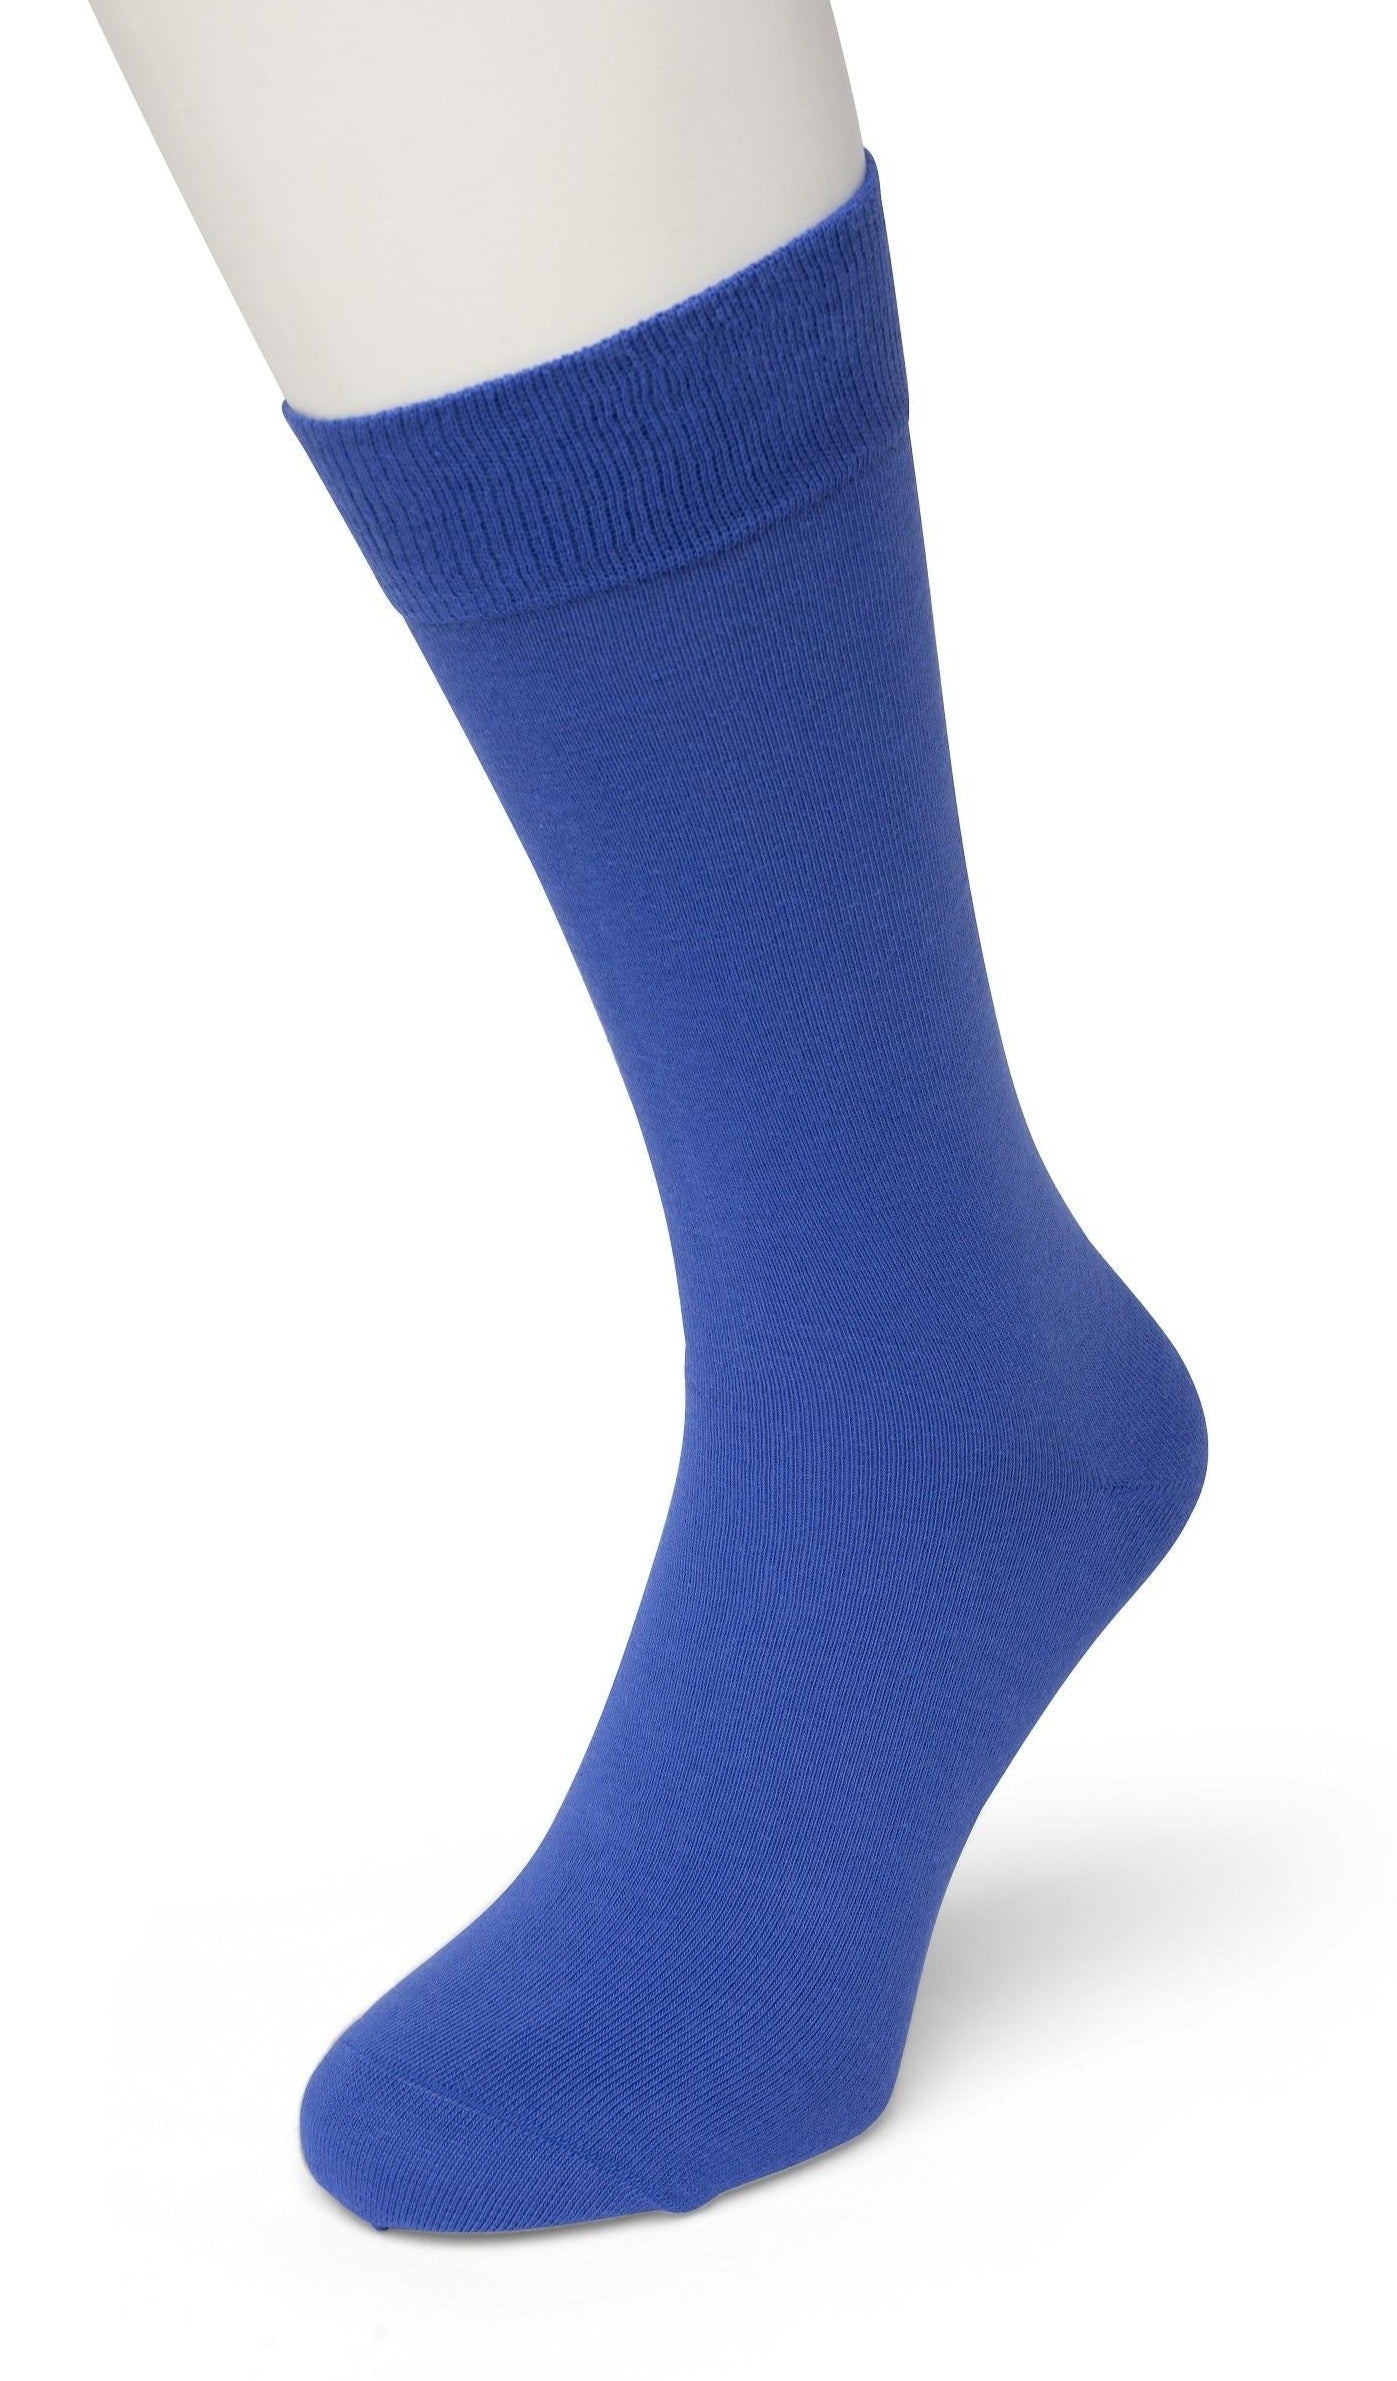 Bonnie Doon 83422 Cotton Sock - Royal blue ankle socks available in women sizes